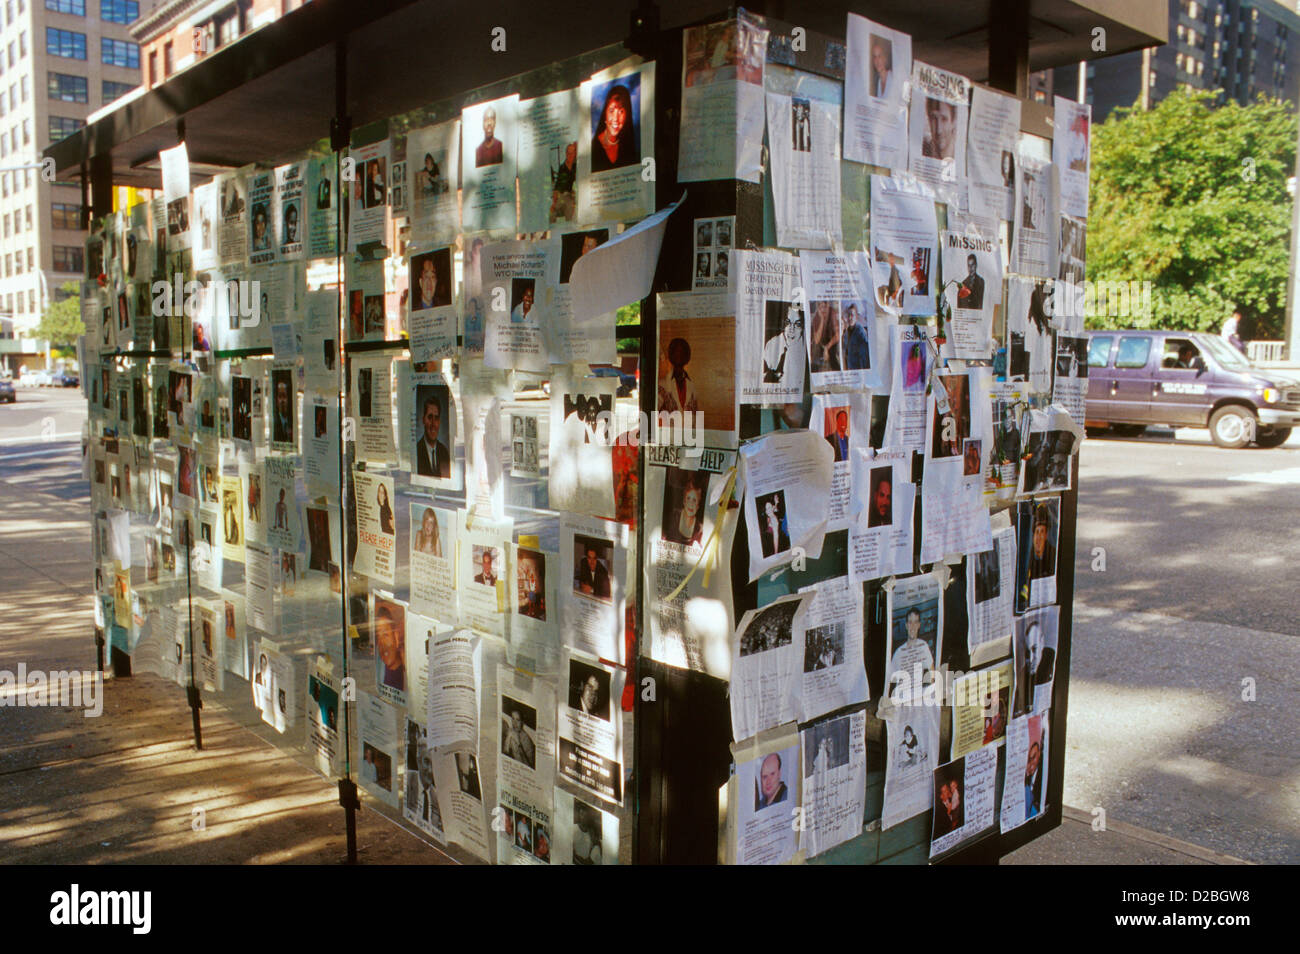 New York City, 9/11/2001. Bus Stop With Photos Of Victims Of World Trade Center Attack Stock Photo